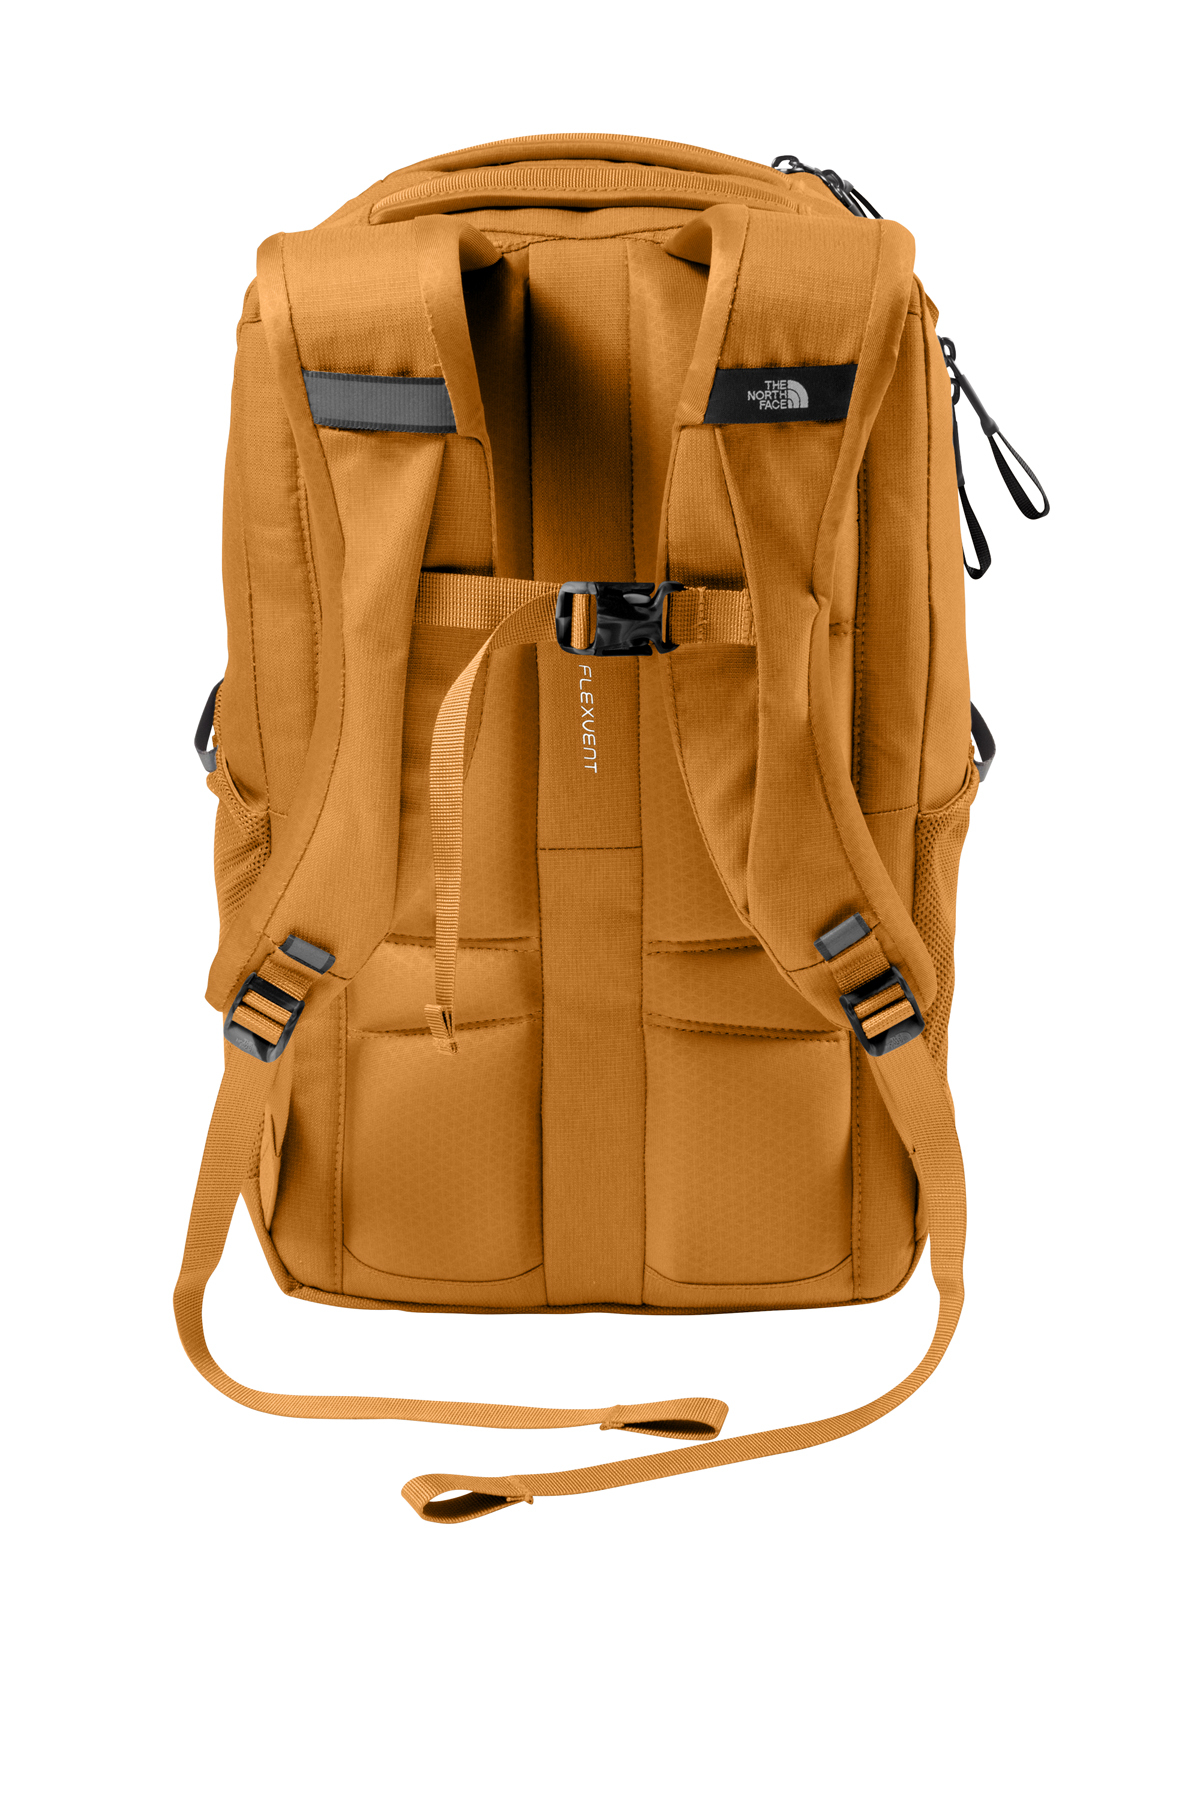 The North Face Stalwart Backpack | Product | SanMar